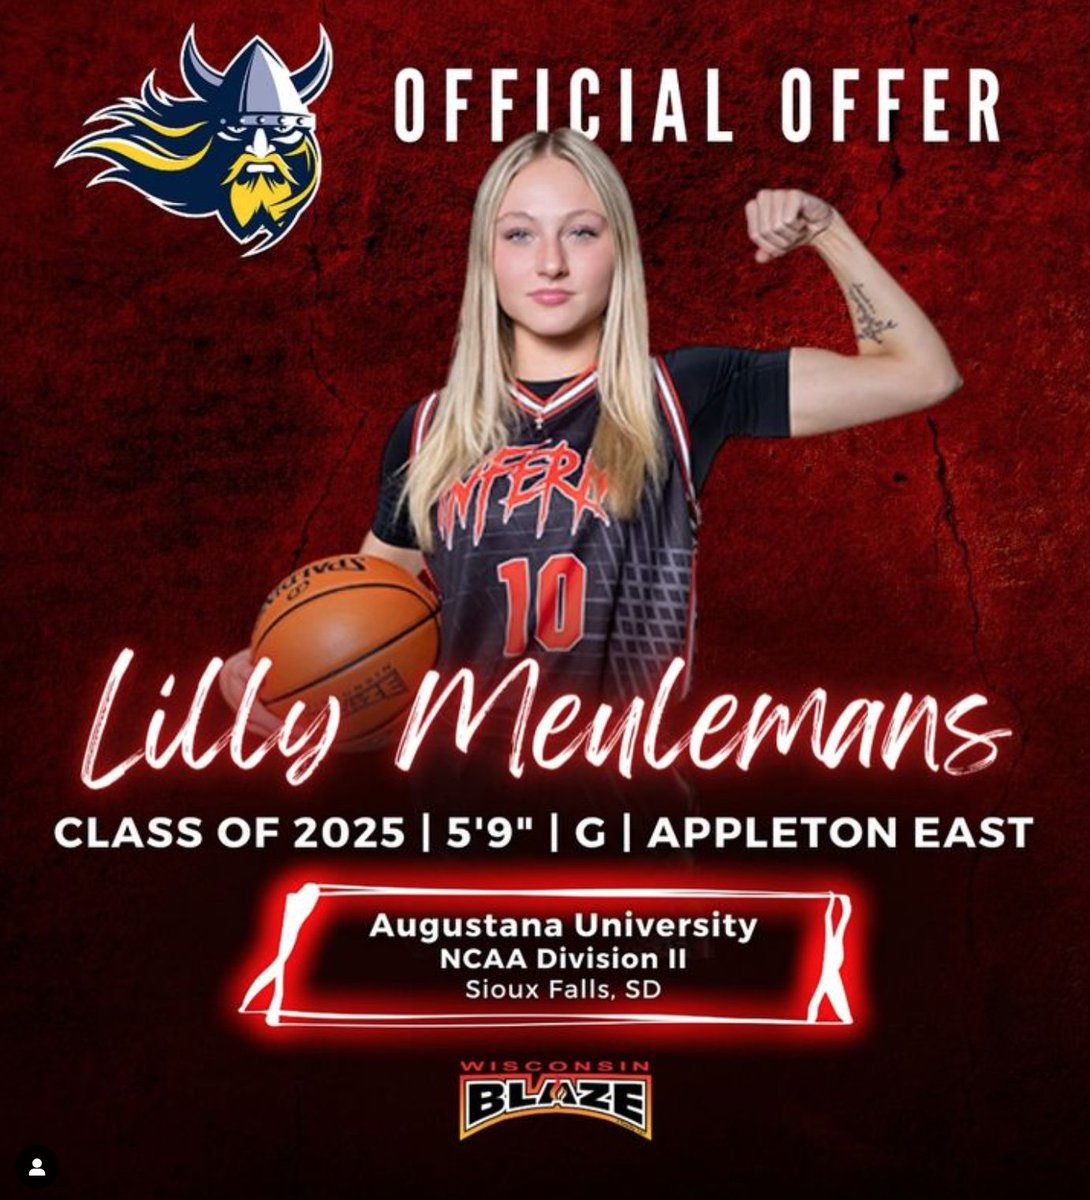 Congratulations to Lilly Meulemans (Class of 2025 | Appleton East | 5’9” G) on receiving an offer to continue her athletic career at NCAA DII Augustana University! Thank you to all of the staff and coaches at Augustana! @augiewbb #BeTheFlame🔥🏀